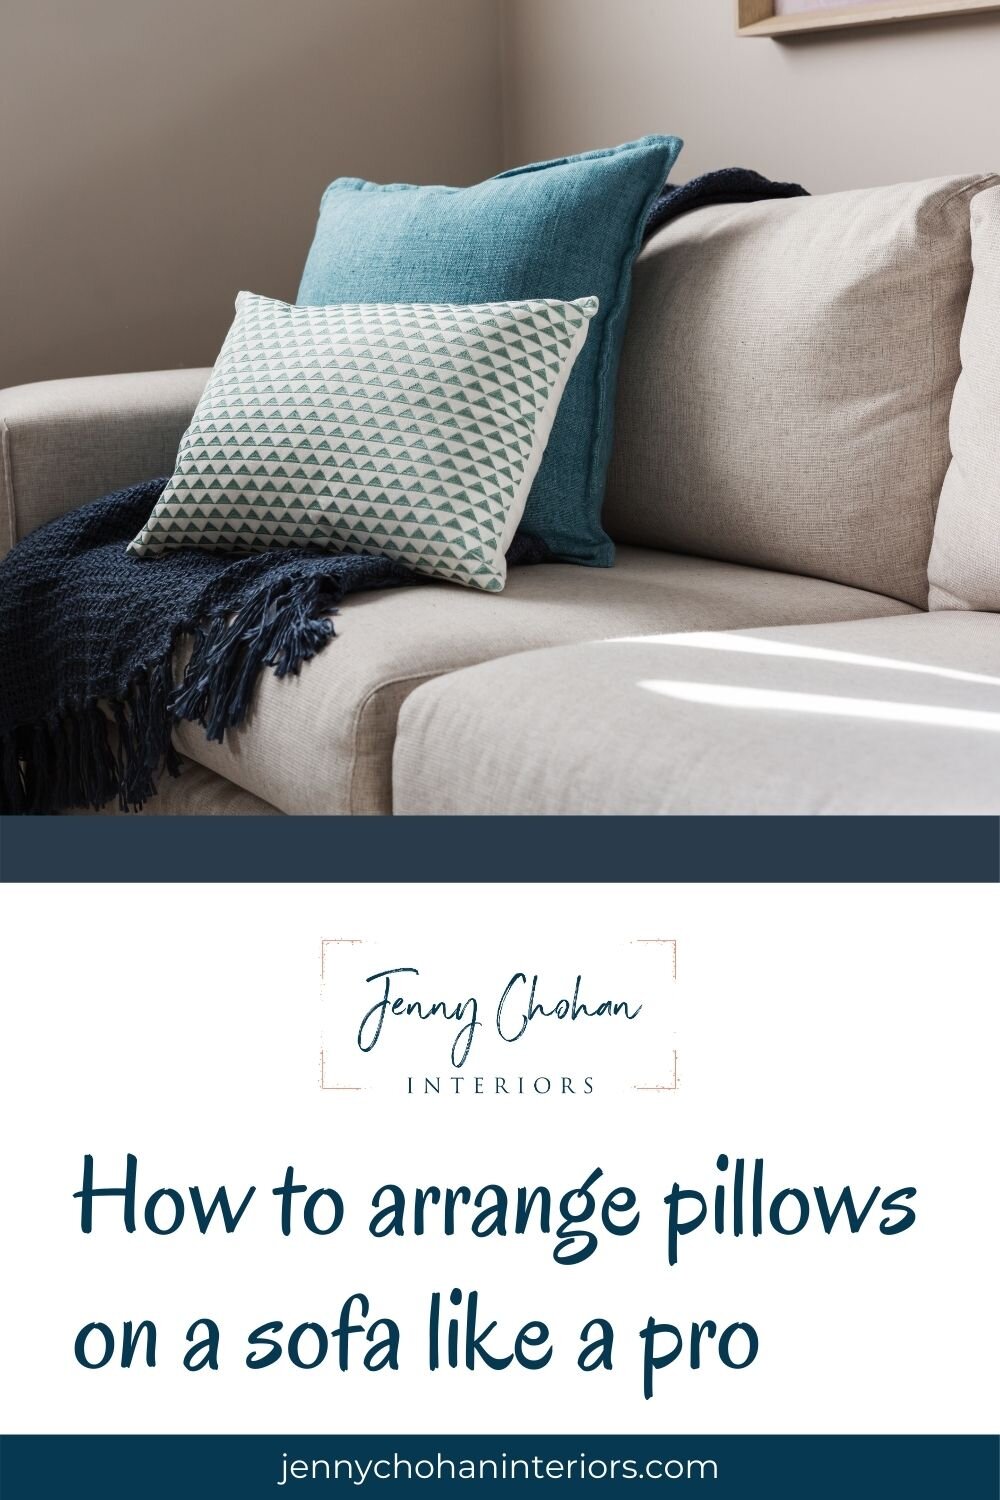 Tips for arranging decorative pillows on a sofa - The Washington Post